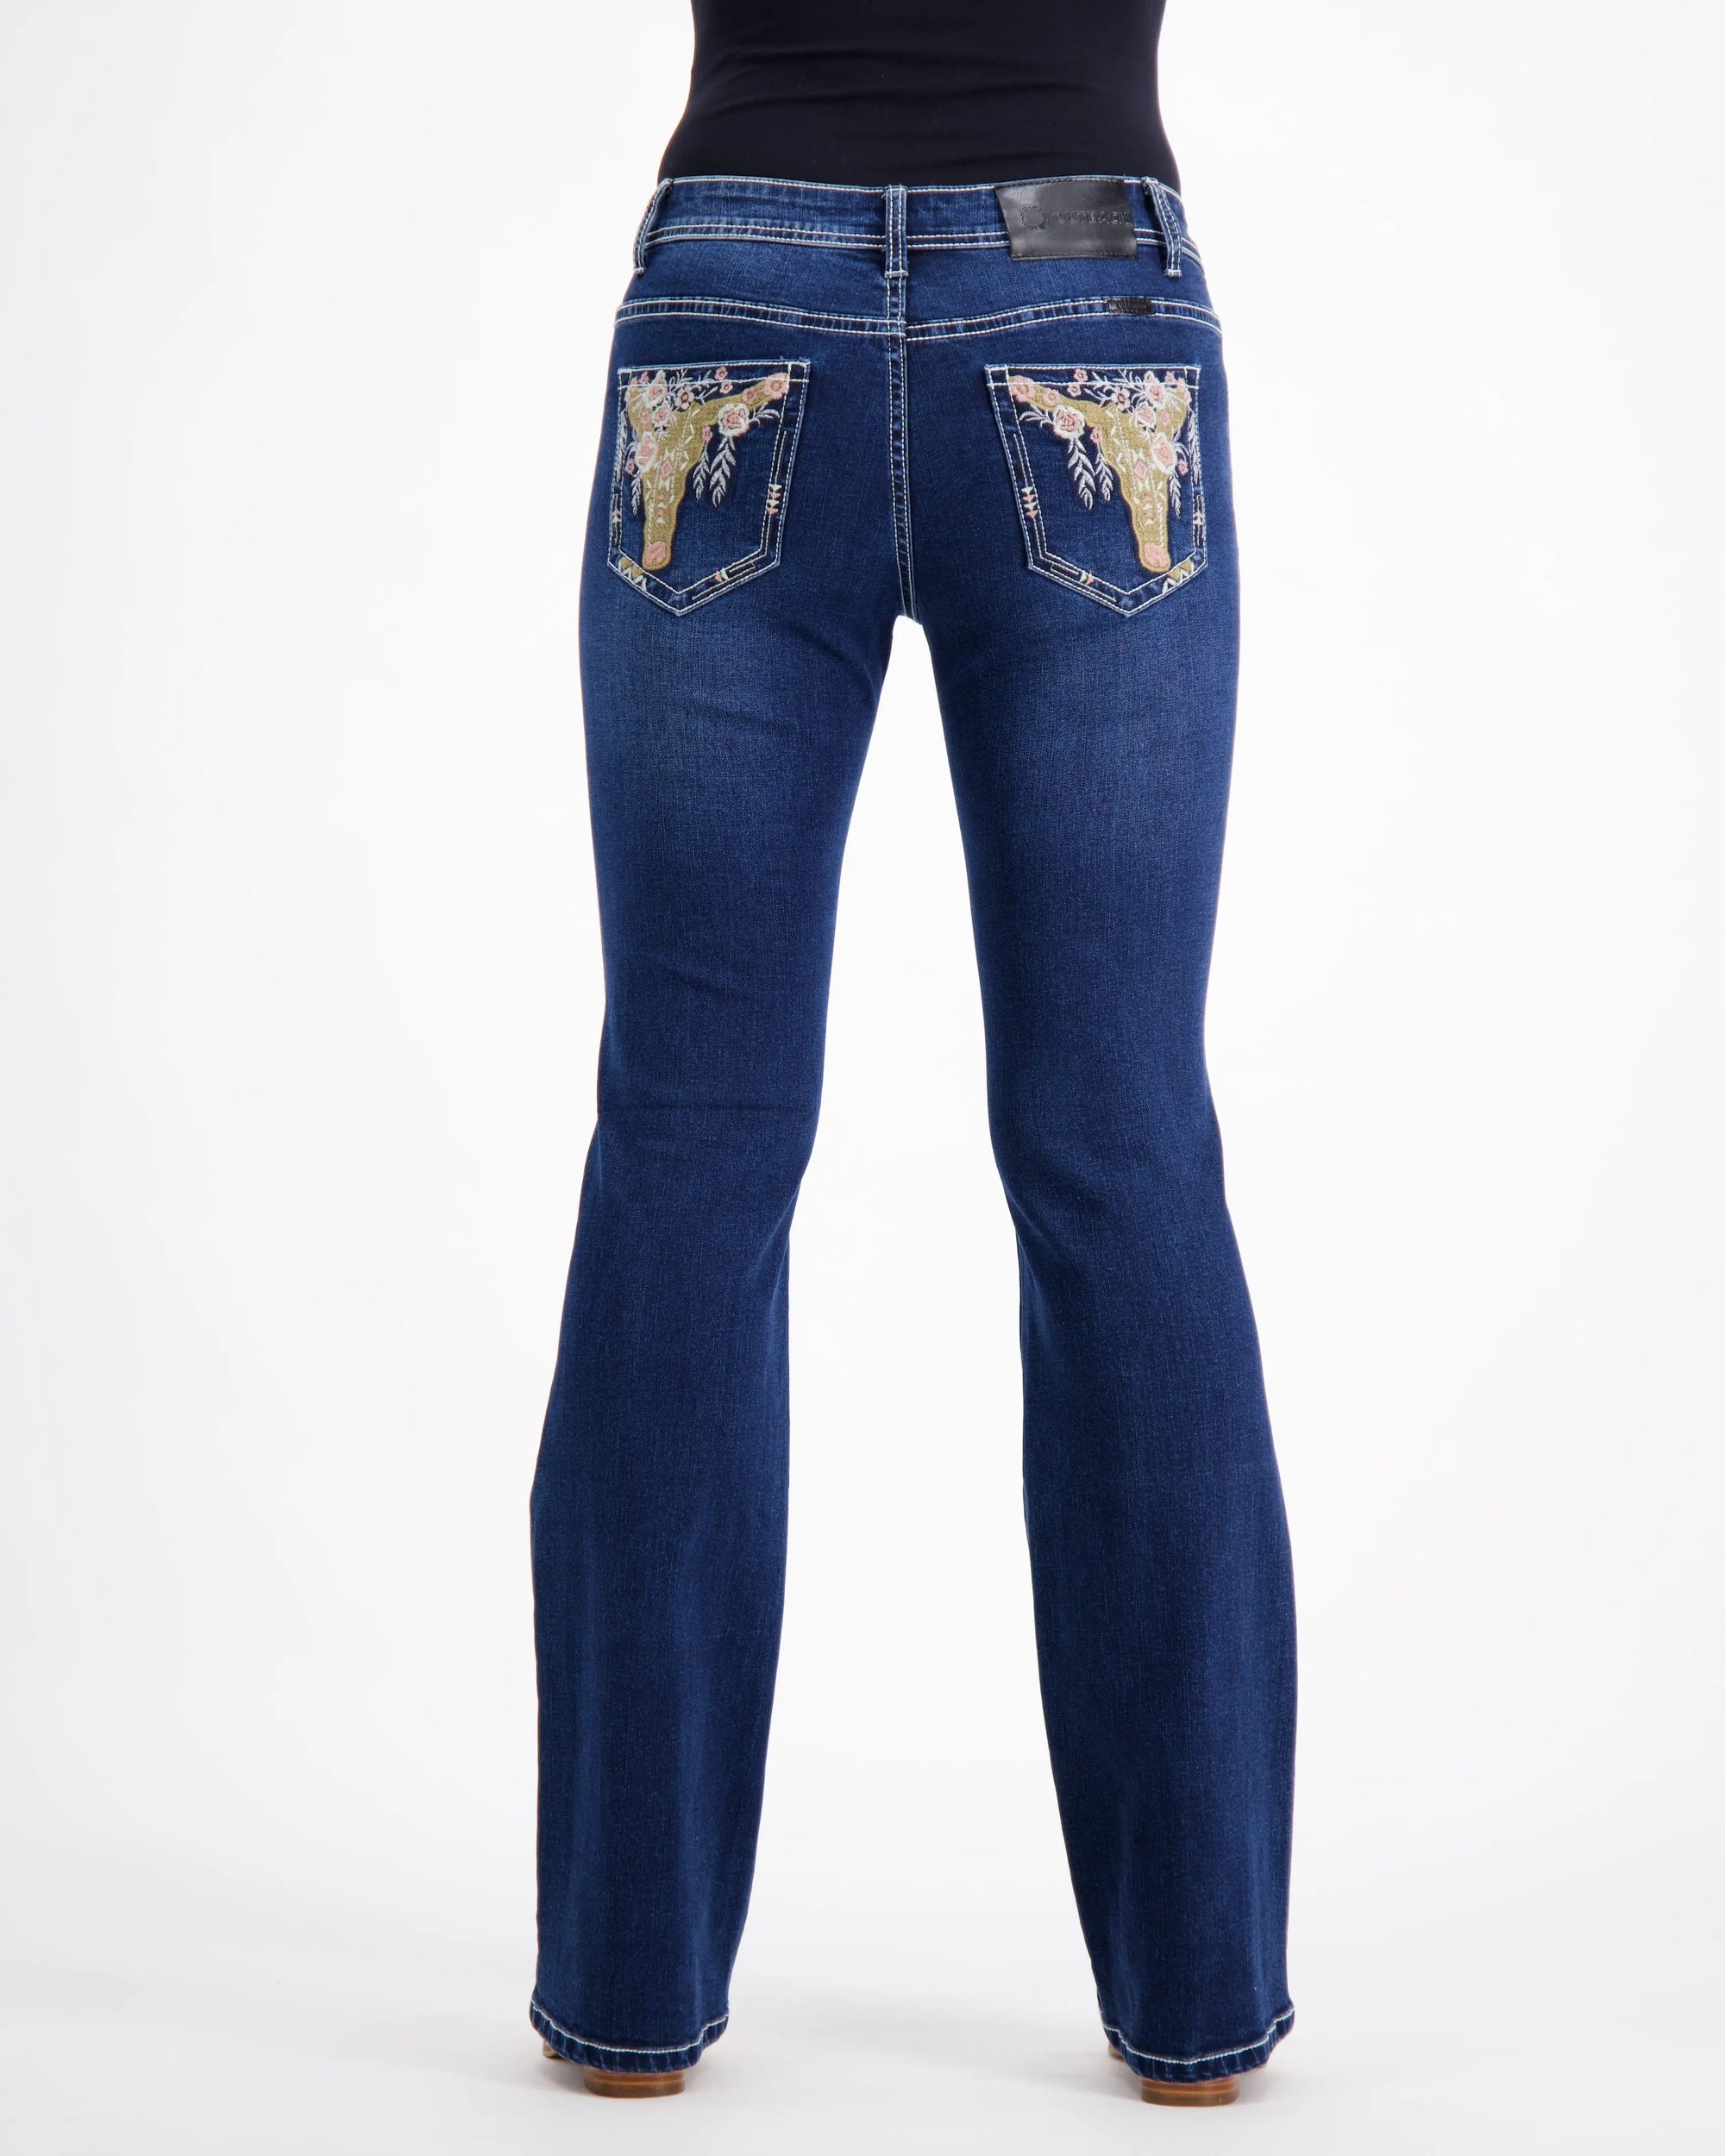 Cady Western Style Stretch Denim Jeans Outback Supply Co